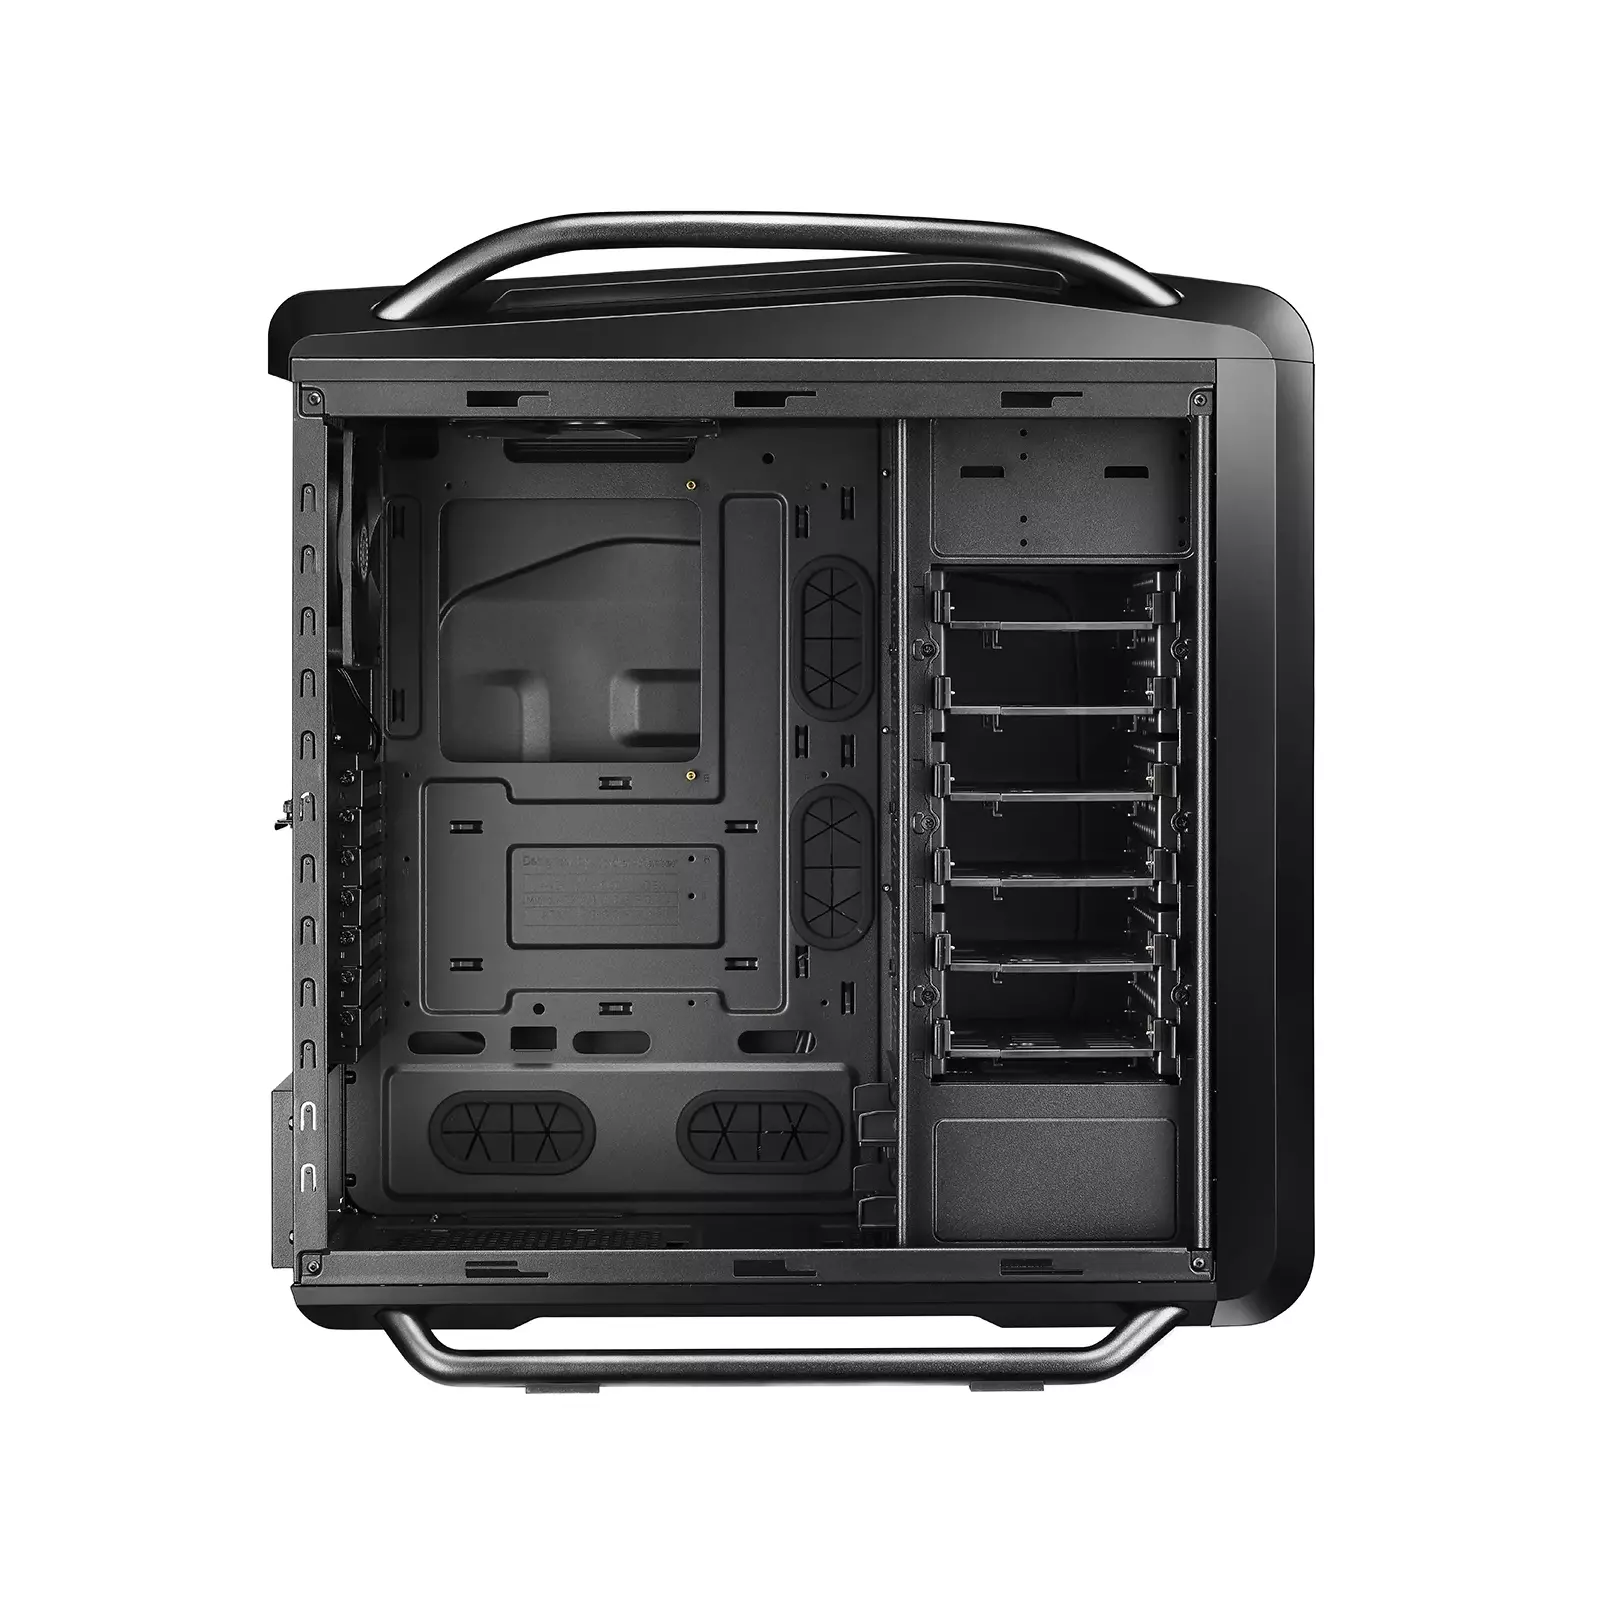 Cooler Master COS-5000-KWN1 Photo 11